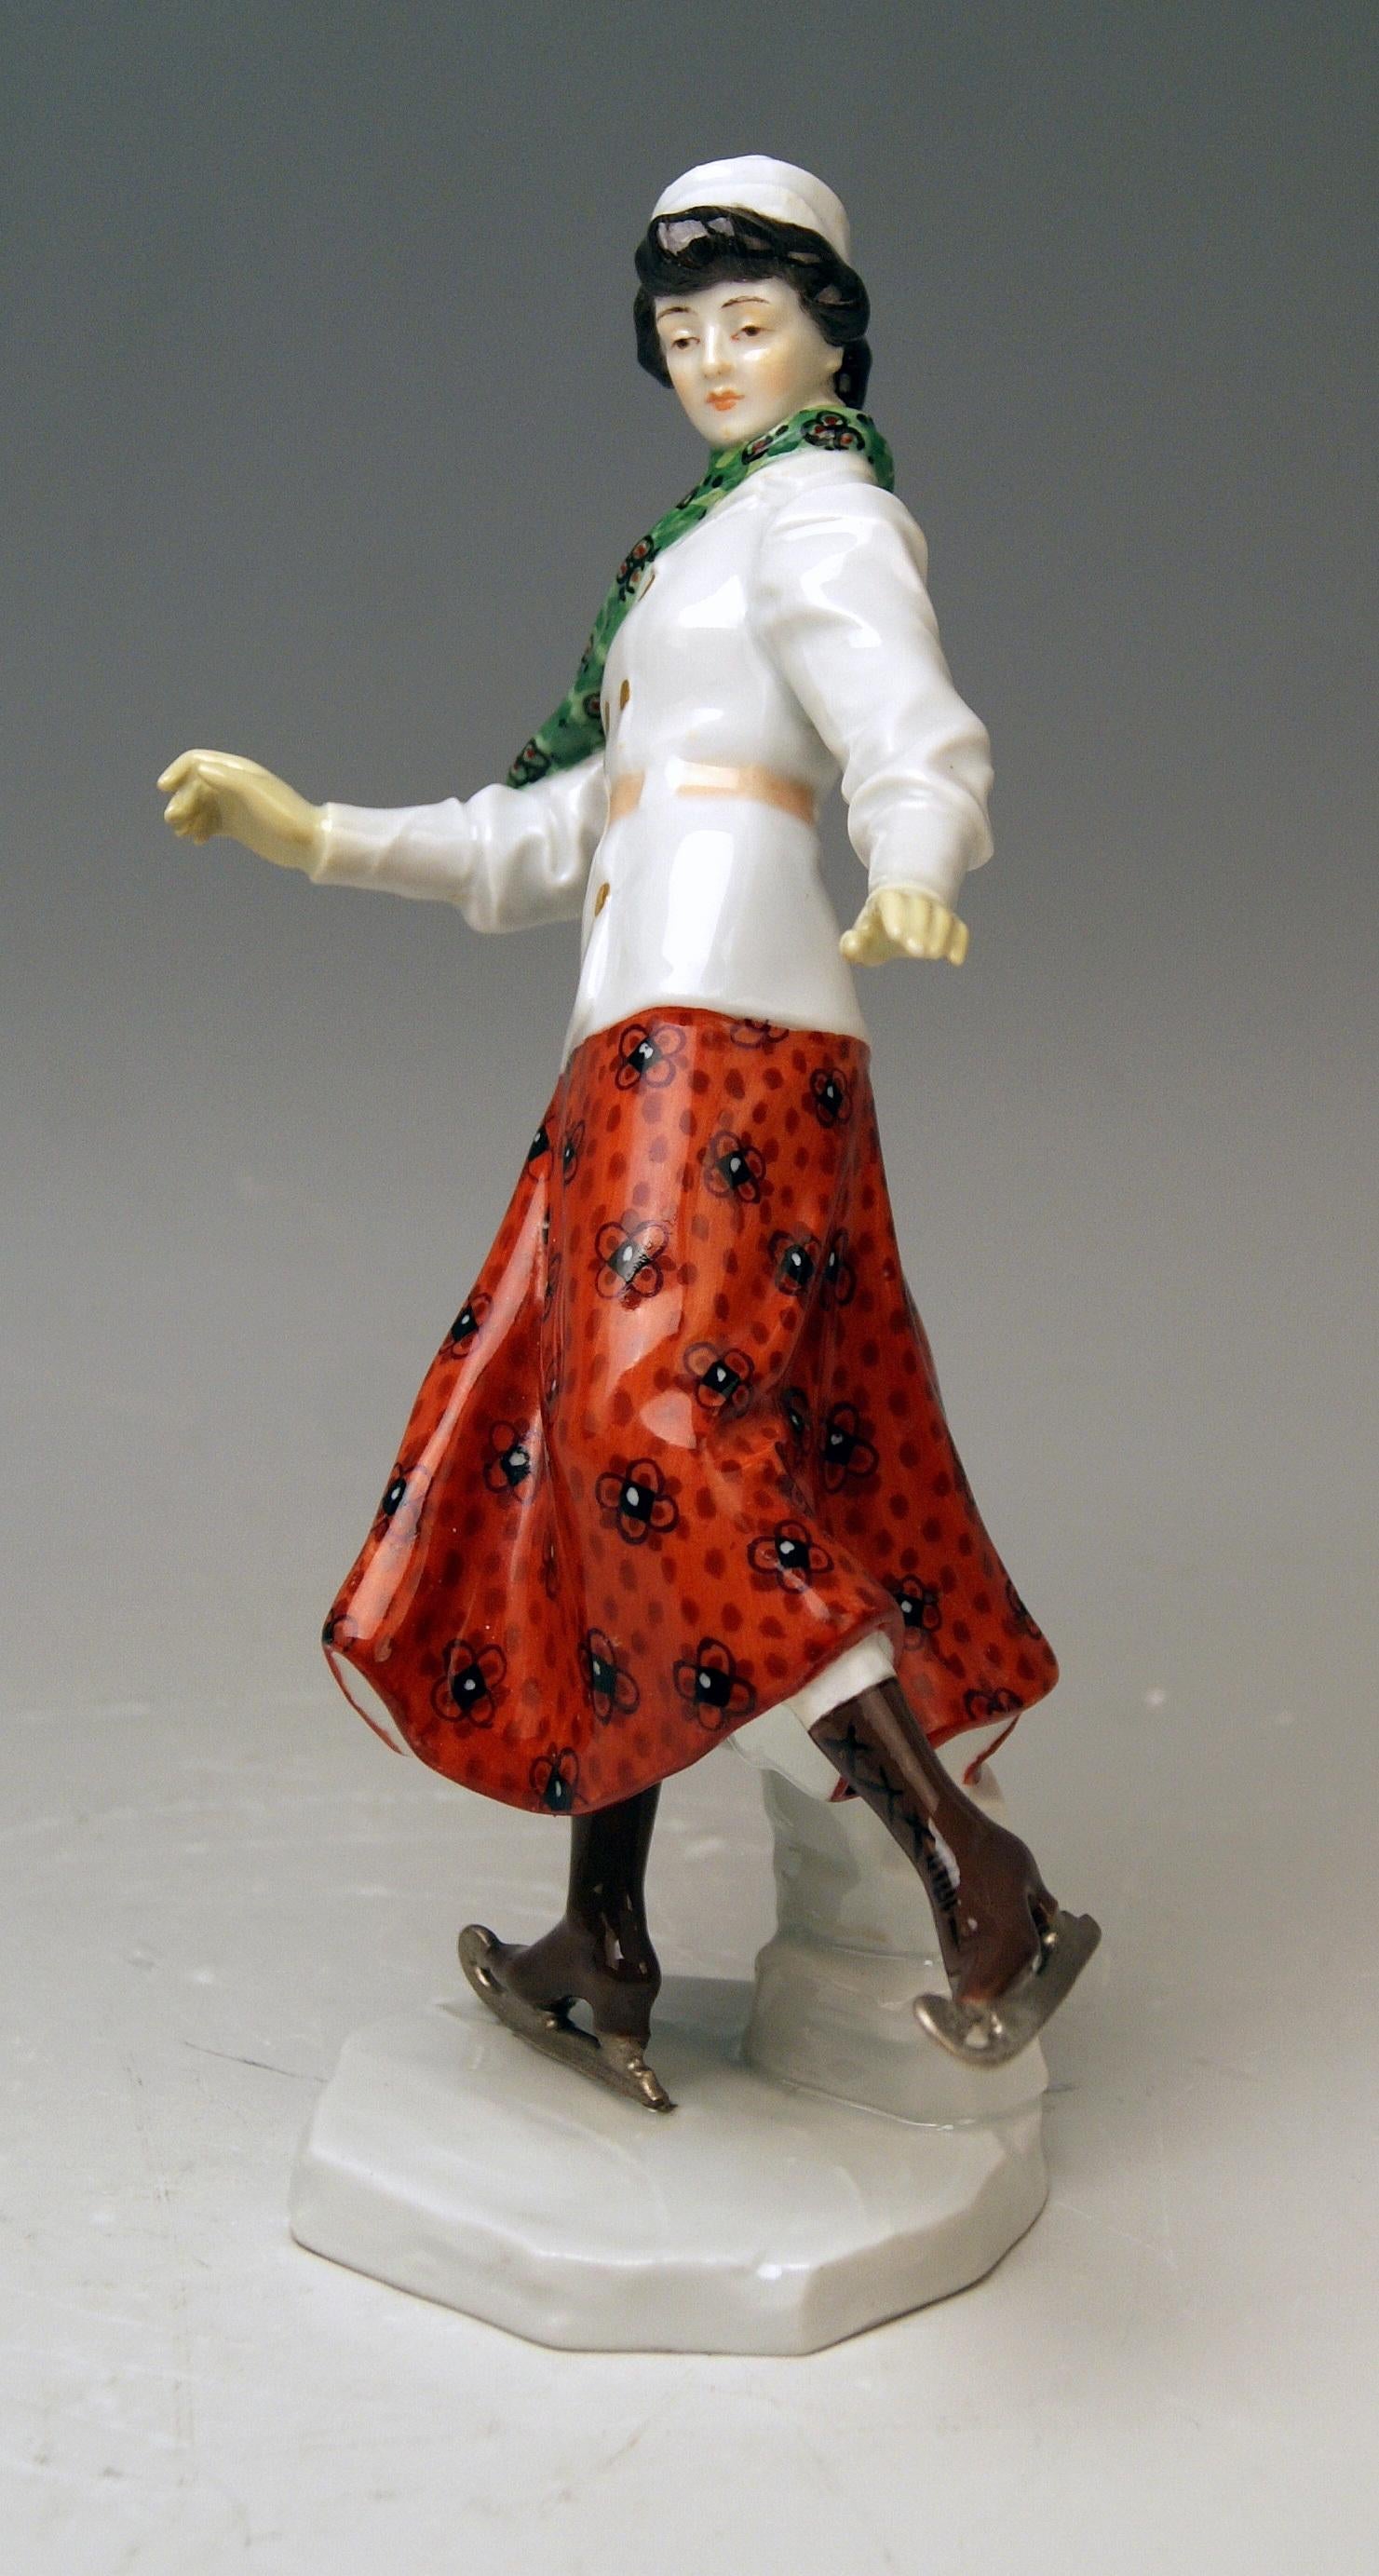 Meissen Gorgeous Art Nouveau Figurine: Lady Ice Skating

Manufactory: Meissen 
Dating: made circa 1911-1912
Hallmarked: Meissen Mark with Pommels on Hilts 
First Quality
Model Z 194 / Painter's Number 67 / Former's Number 36
Material: